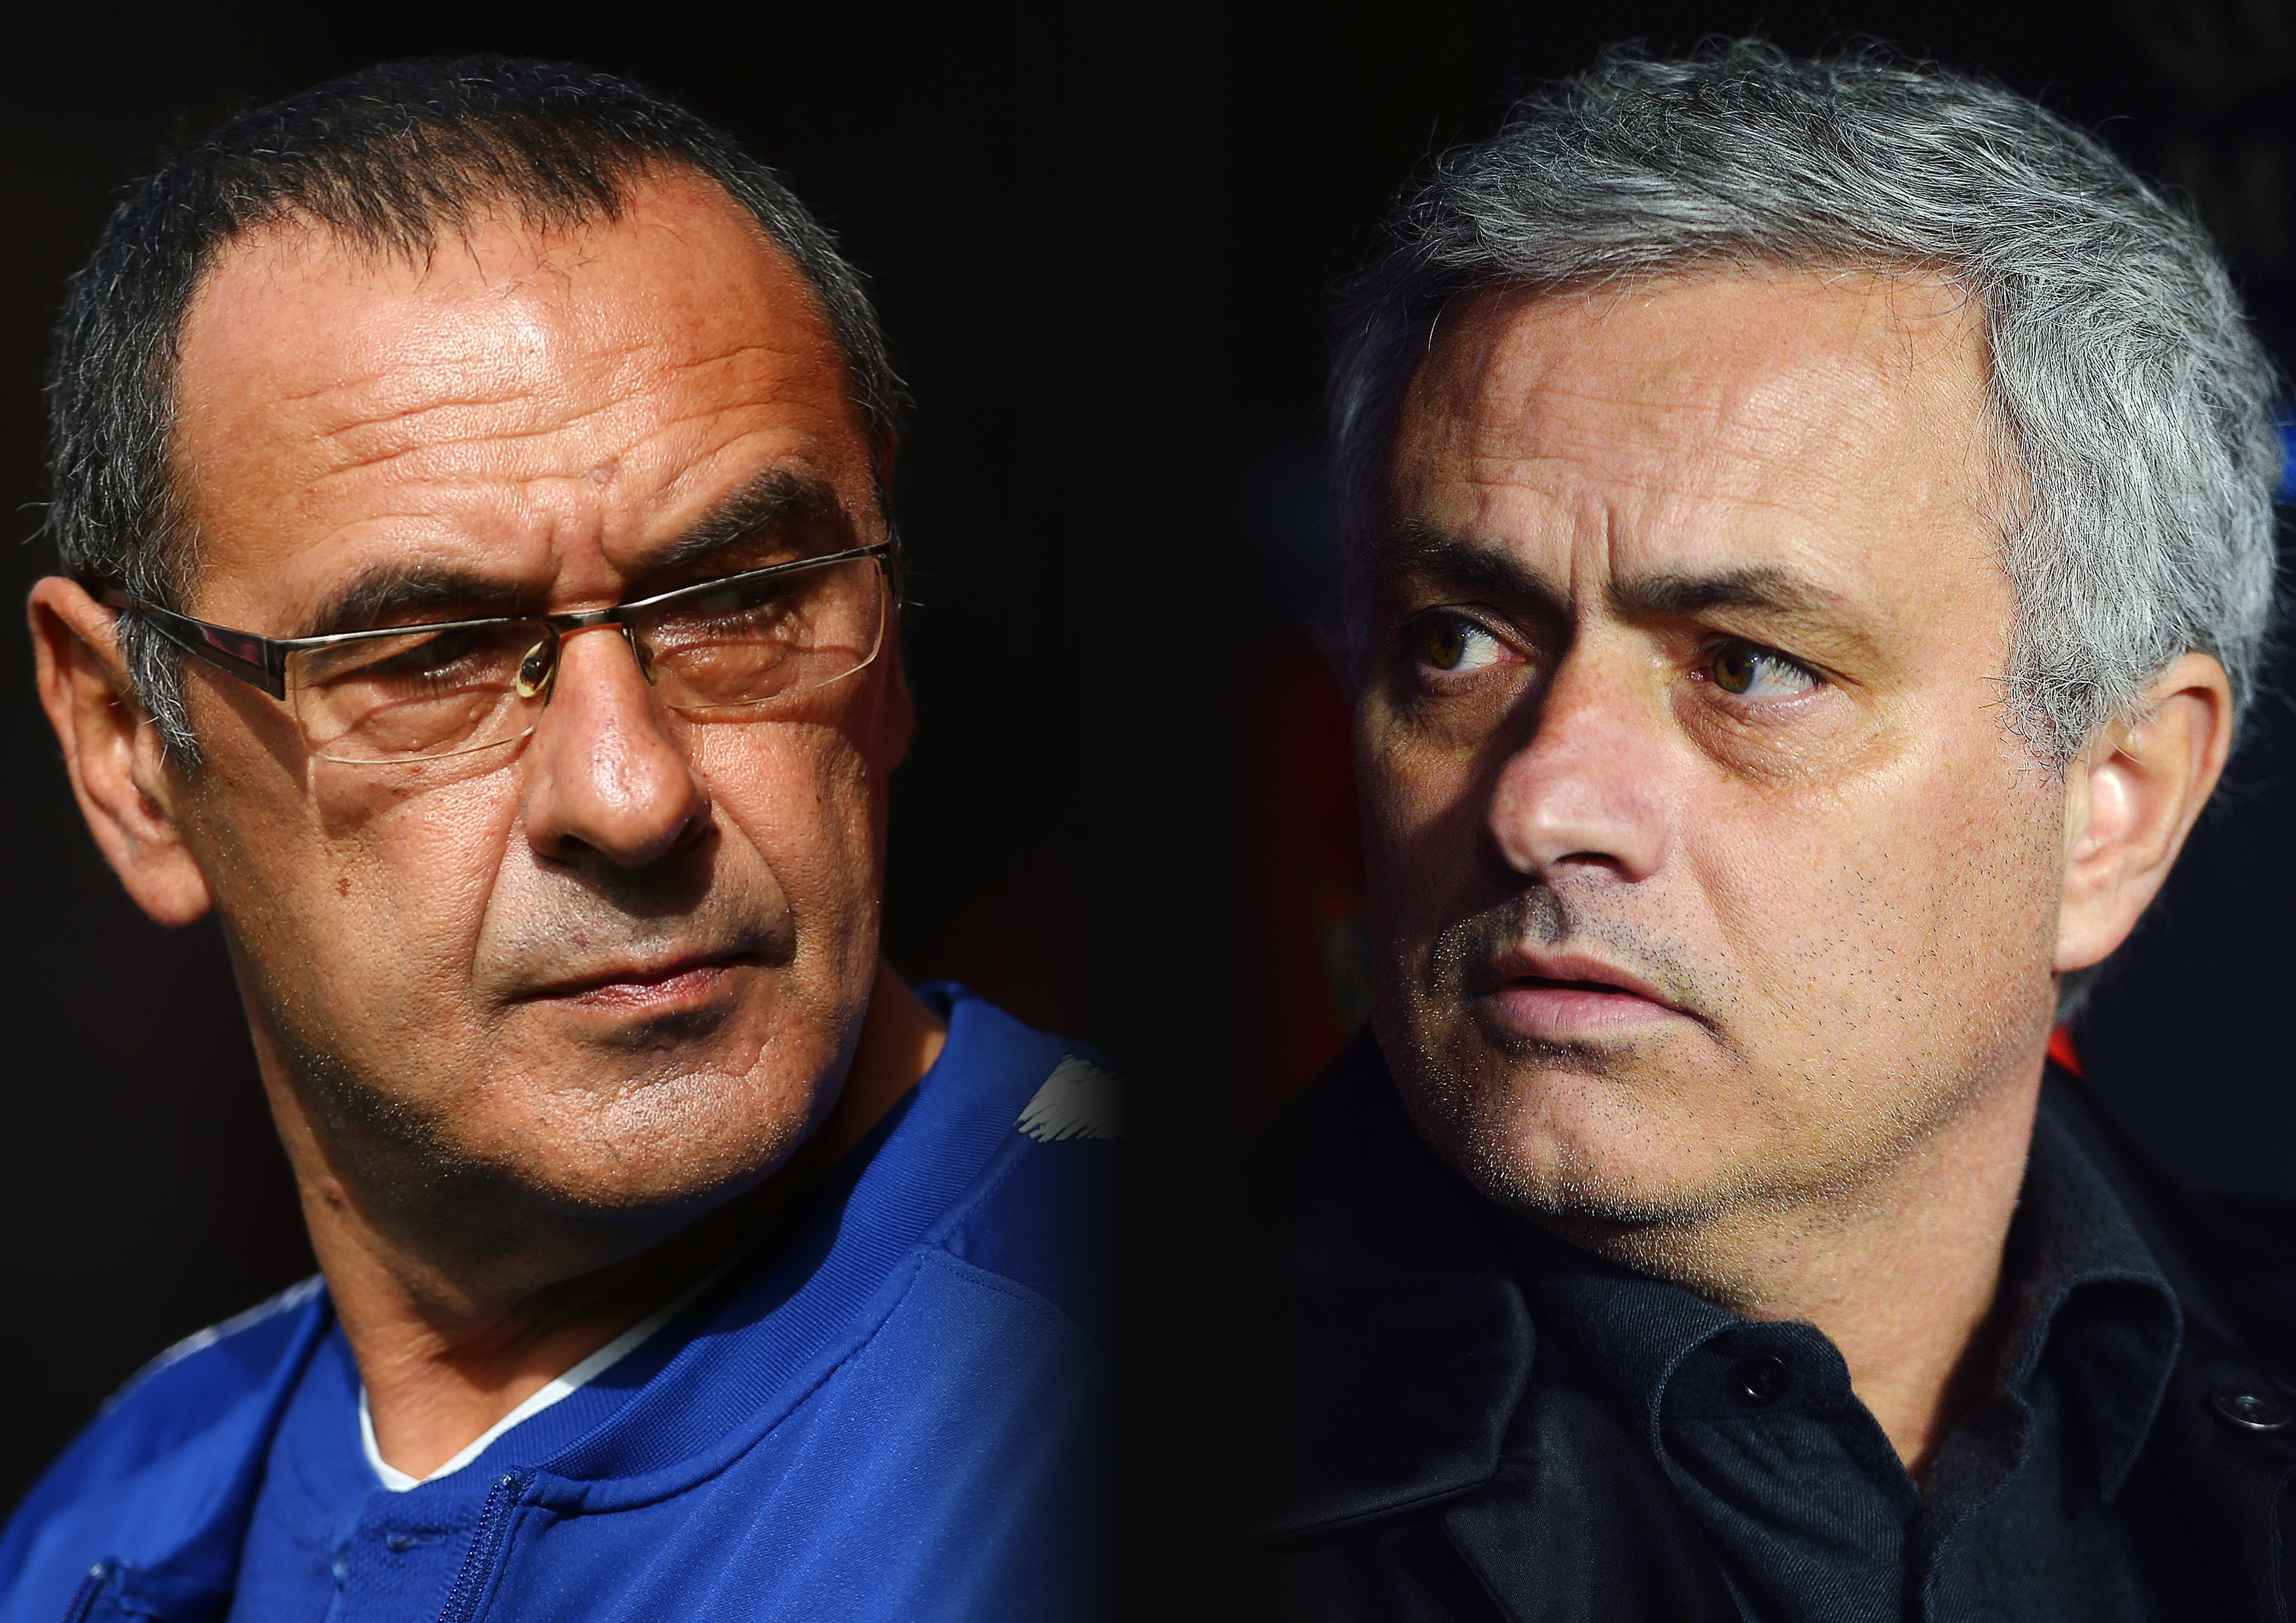 FILE PHOTO (EDITORS NOTE: COMPOSITE OF IMAGES - Image numbers 1047091738,922326746 - GRADIENT ADDED) In this composite image a comparison has been made between Maurizio Sarri, Manager of Chelsea (L) and Jose Mourinho, Manager of Manchester United. Chelsea FC and Manchester United meet in a Premier league fixture on October 20, 2018 at Stamford Bridge,London.***LEFT IMAGE***  SOUTHAMPTON, ENGLAND - OCTOBER 07: Maurizio Sarri, Manager of Chelsea looks on prior to the Premier League match between Southampton FC and Chelsea FC at St Mary's Stadium on October 7, 2018 in Southampton, United Kingdom. (Photo by Jordan Mansfield/Getty Images) ***RIGHT IMAGE***  SEVILLE, SPAIN - FEBRUARY 21: Jose Mourinho, Manager of Manchester United looks on during the UEFA Champions League Round of 16 First Leg match between Sevilla FC and Manchester United at Estadio Ramon Sanchez Pizjuan on February 21, 2018 in Seville, Spain. (Photo by Aitor Alcalde/Getty Images)